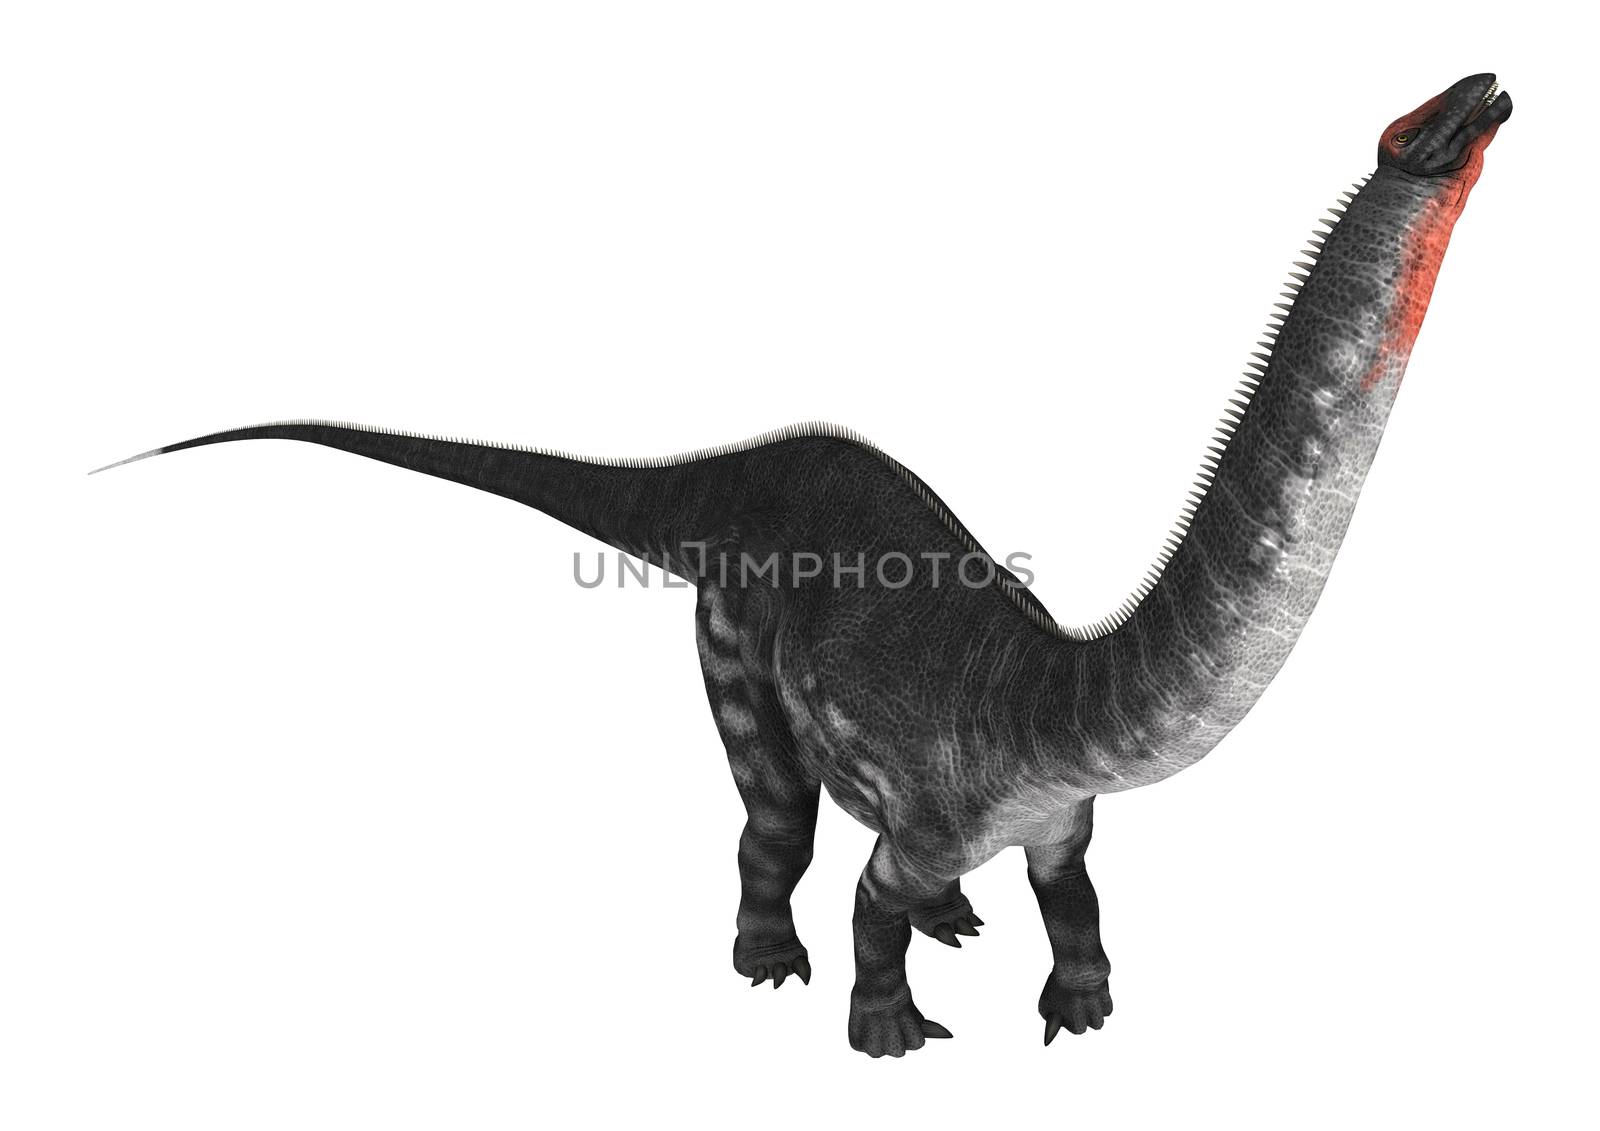 3D digital render of a dinosaur Apatosaurus isolated on white background